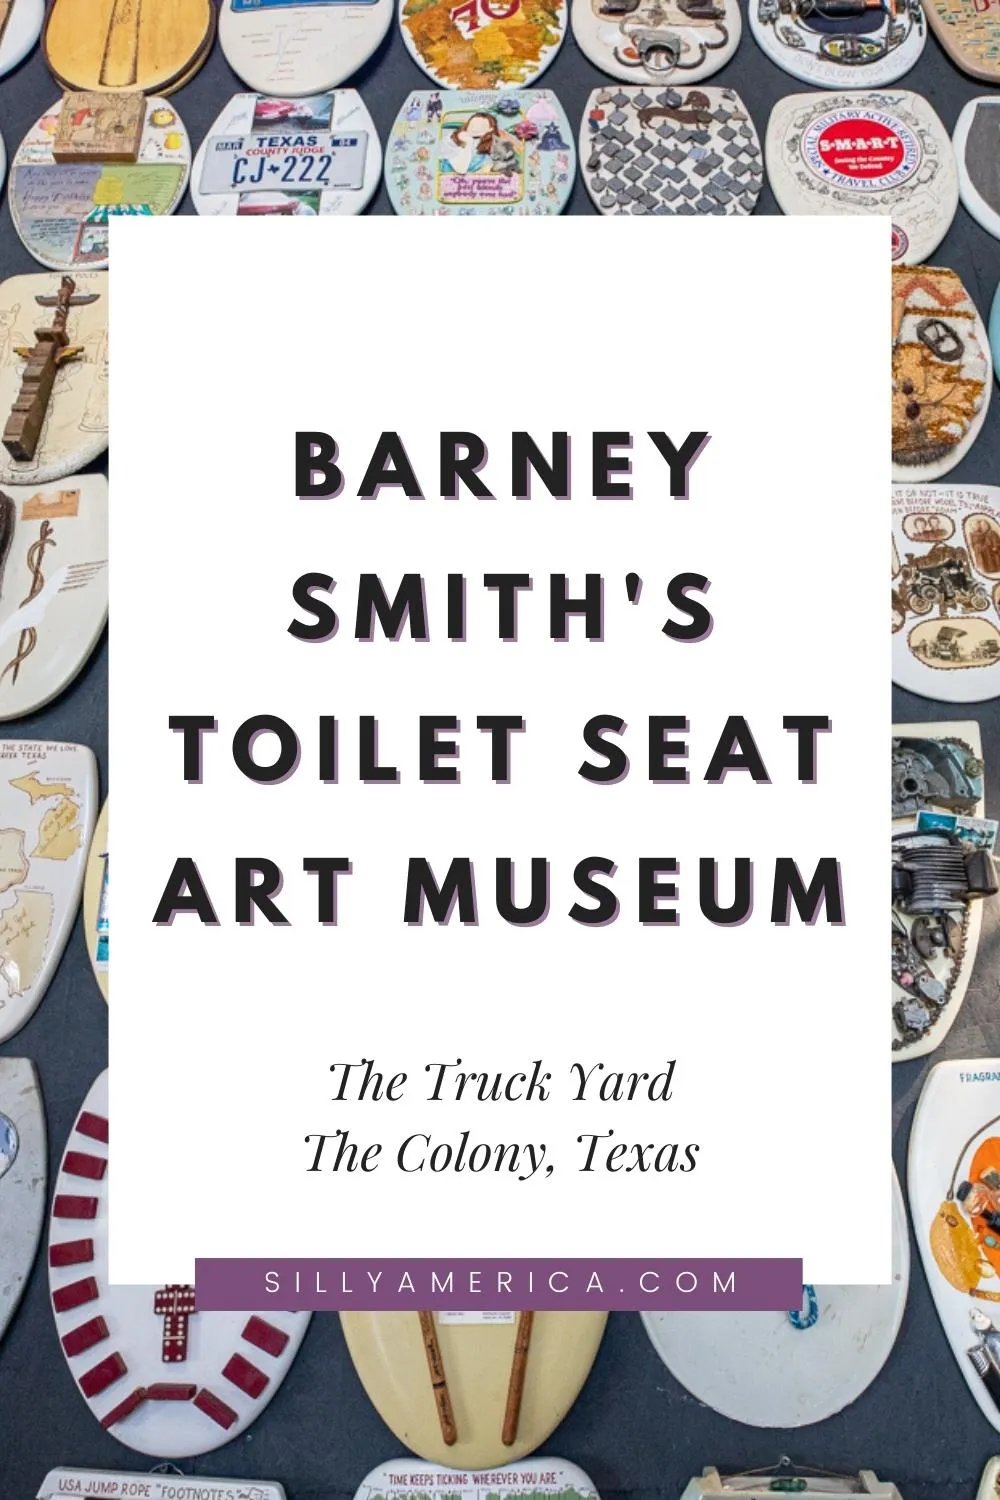 This roadside attraction just might make you go flush. In more ways than one! On the second floor of a Texas beer garden you'll find this unusual museum conveniently located by the bathrooms: Barney Smith's Toilet Seat Art Museum in The Colony, Texas. Visit this weird museum on your Texas road trip! It's a fun roadside attraction and weird museum to add to your travel itinerary! #RoadTrip #Museum #WeirdMuseum #RoadsideAttractions #RoadTrip #Texas #TexasRoadTrip #TexasRoadsideAttractions